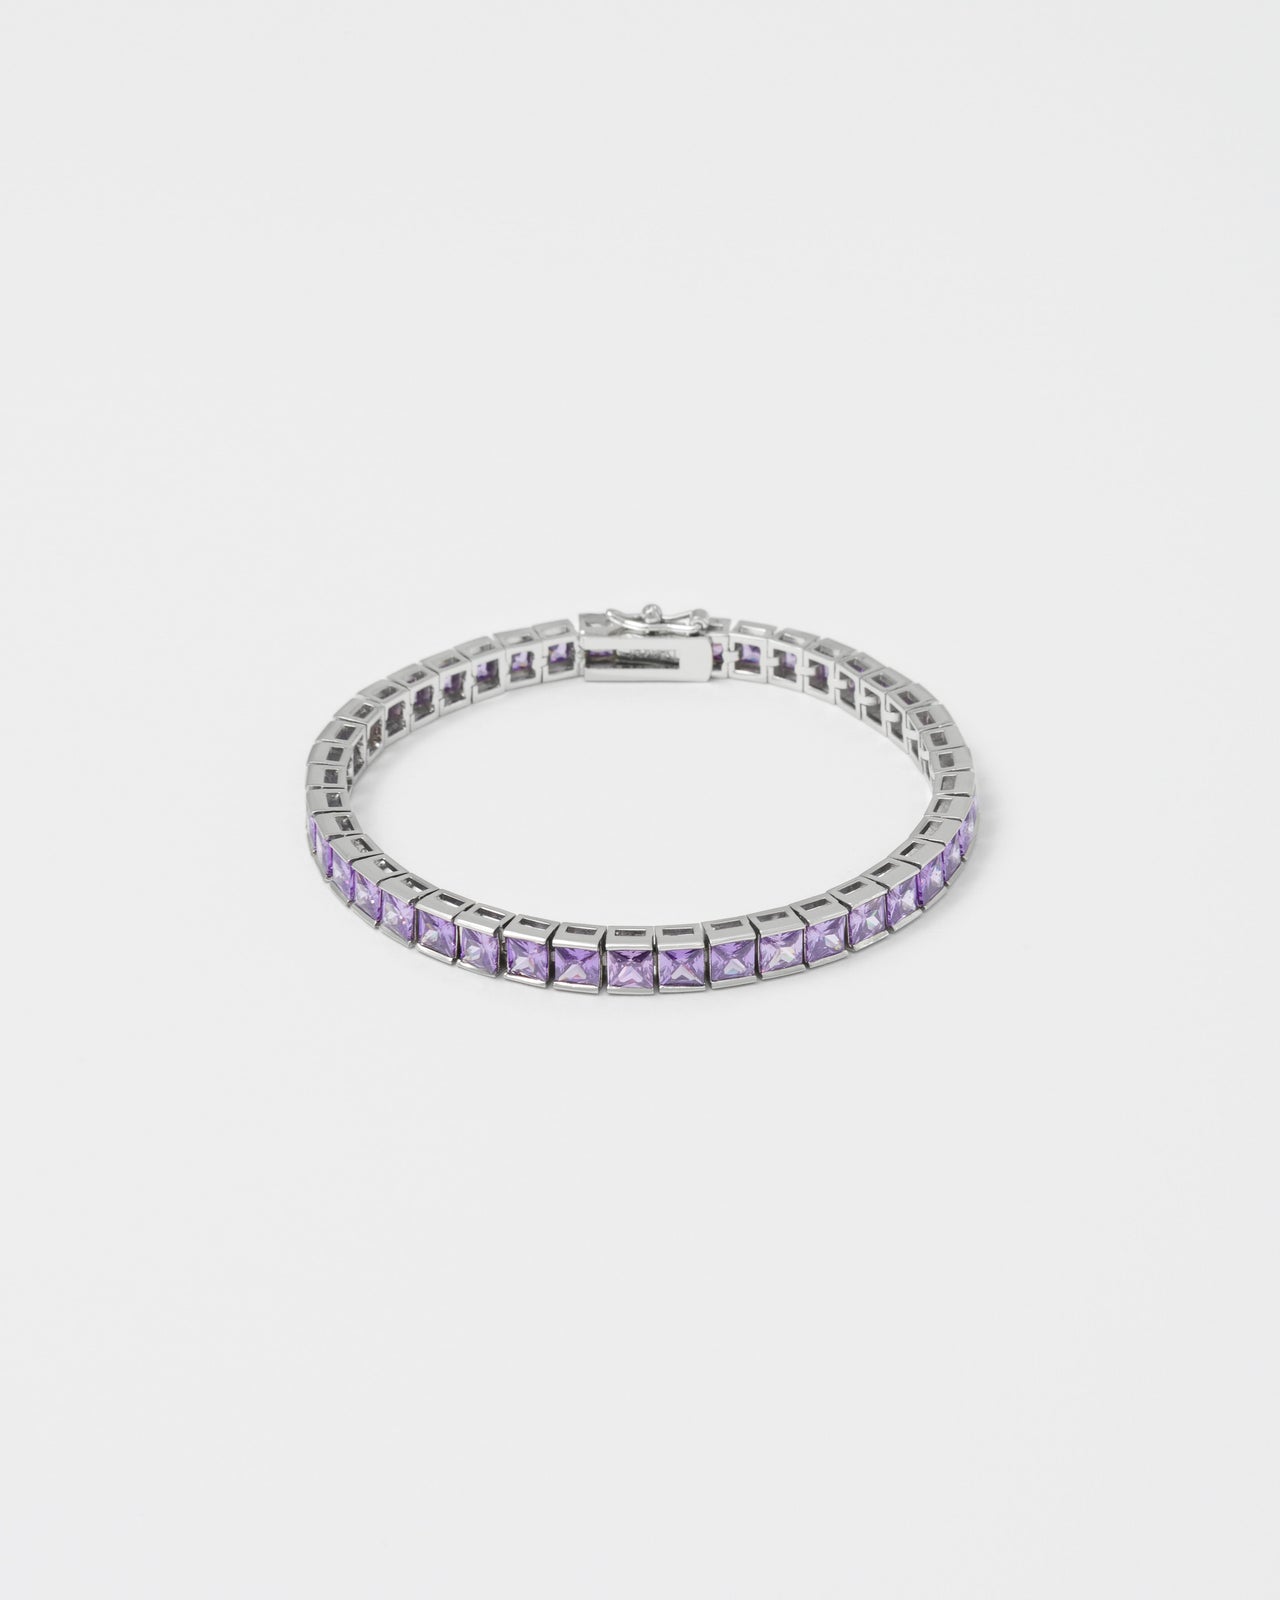 18k white gold coated tennis chain bracelet with hand-set princess-cut amethyst stones